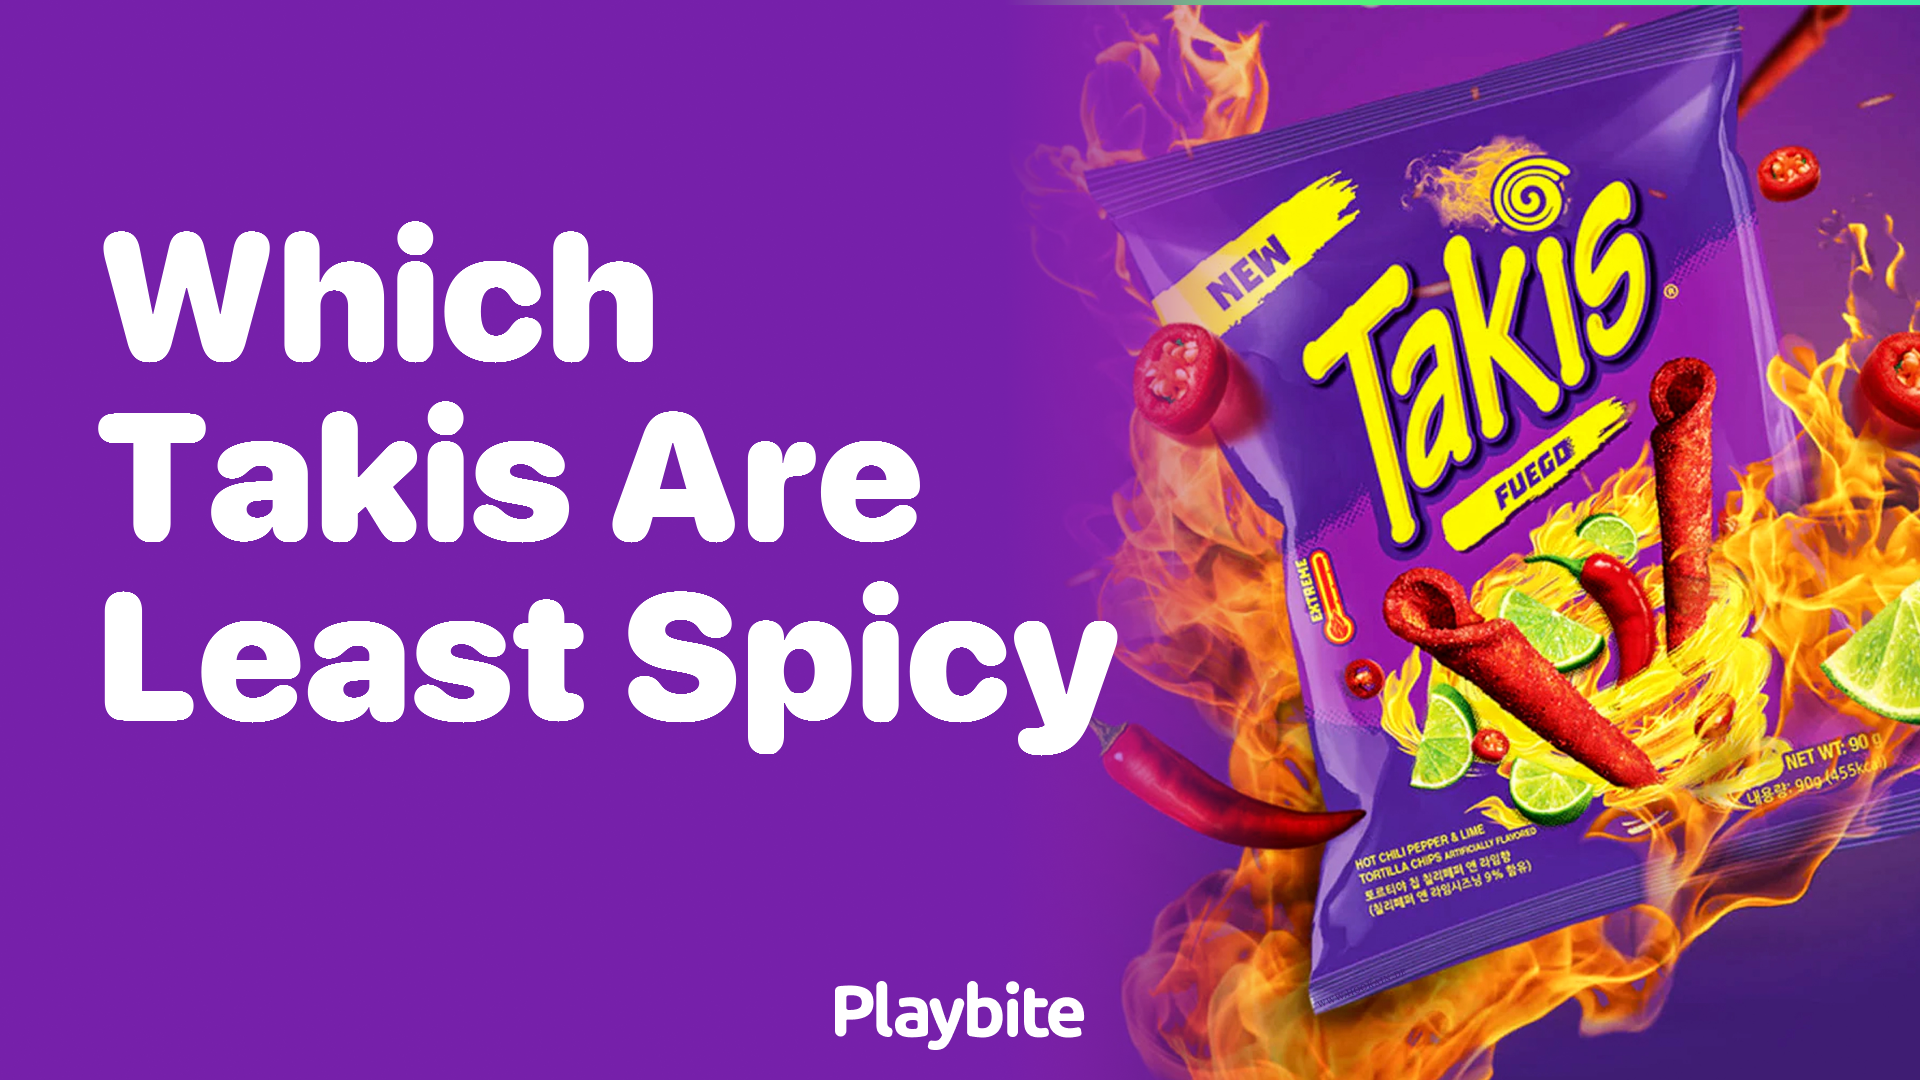 Which Takis Are Least Spicy?